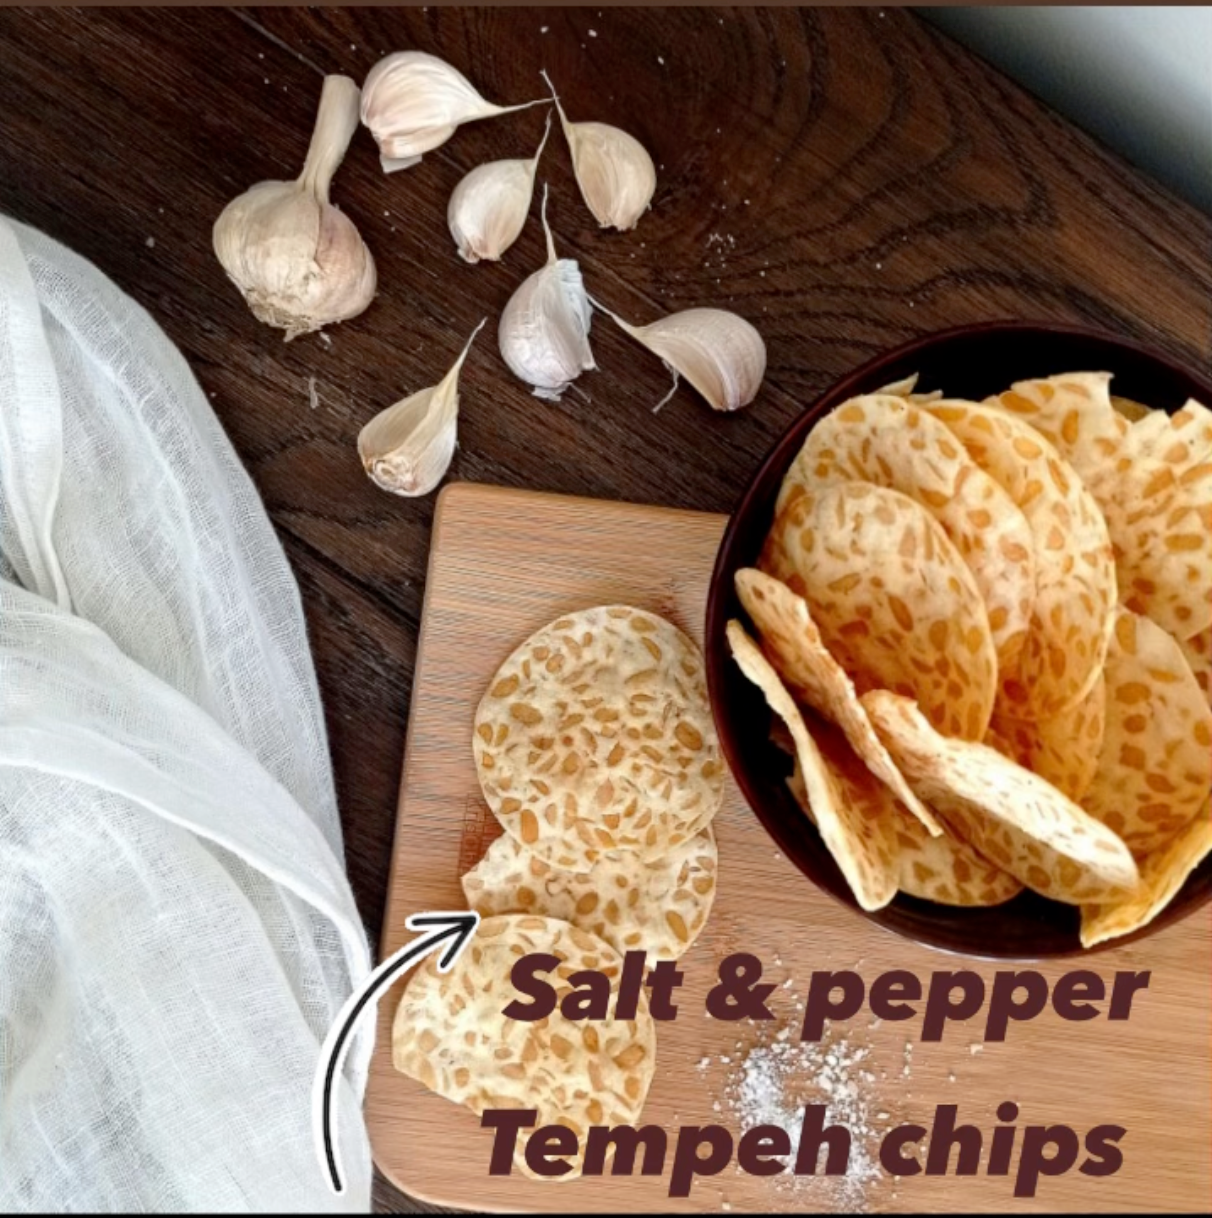  chickpea Tempeh chips